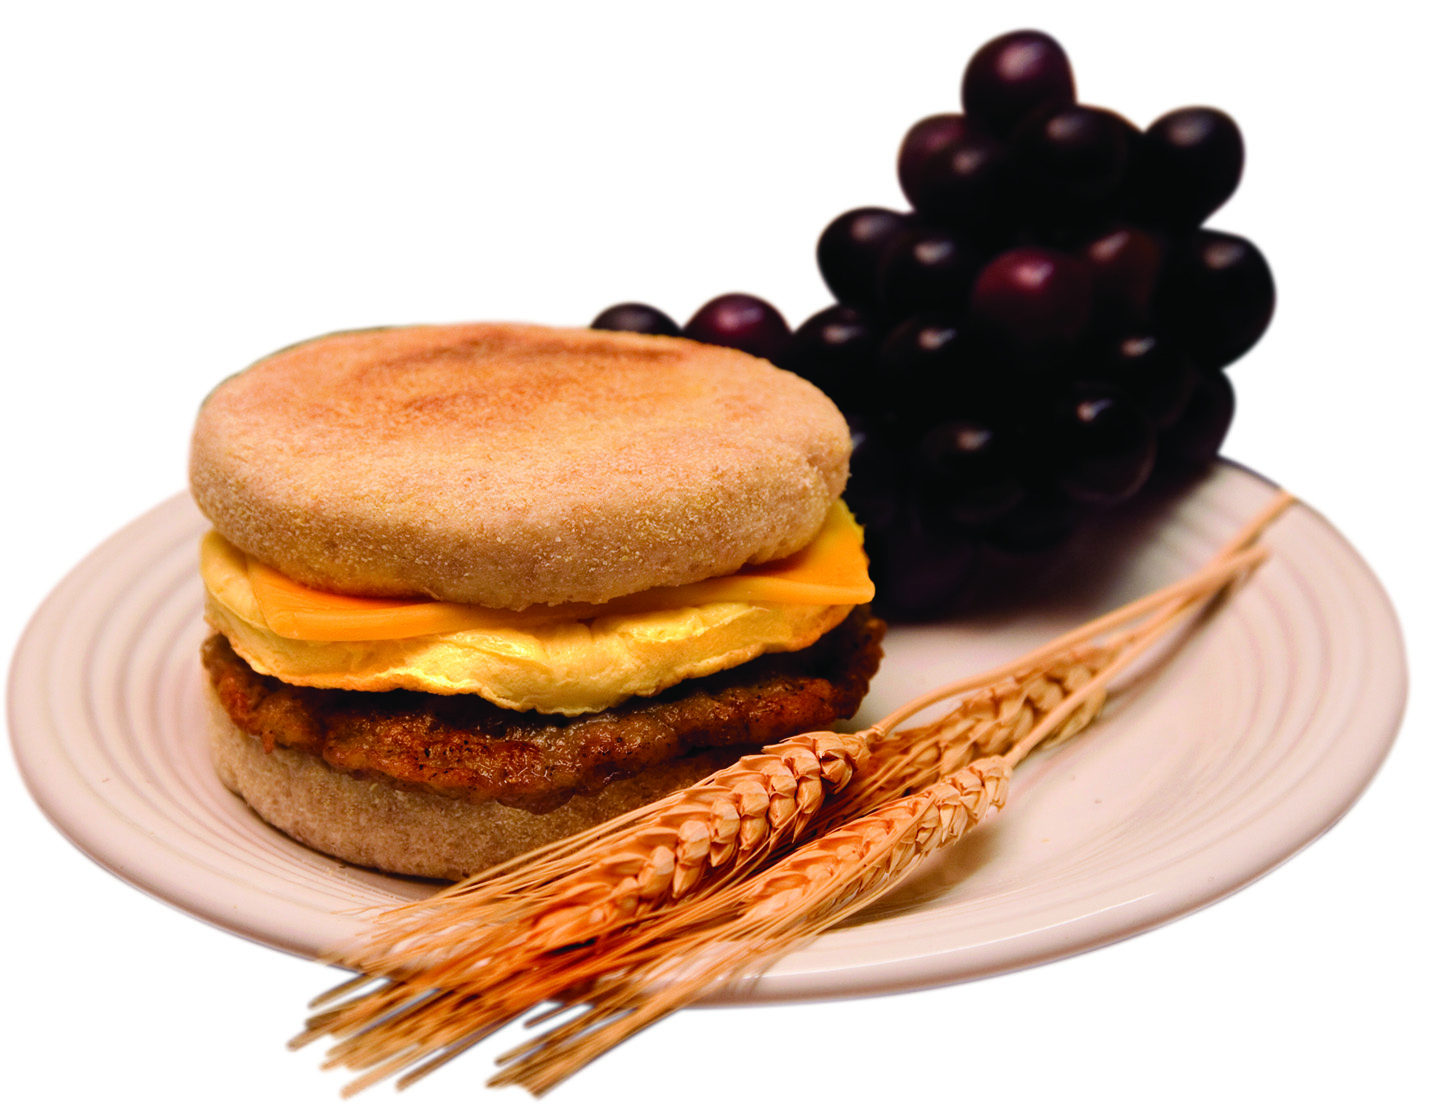 Sausage & Cheddar Cheese on Whole Wheat English Muffin